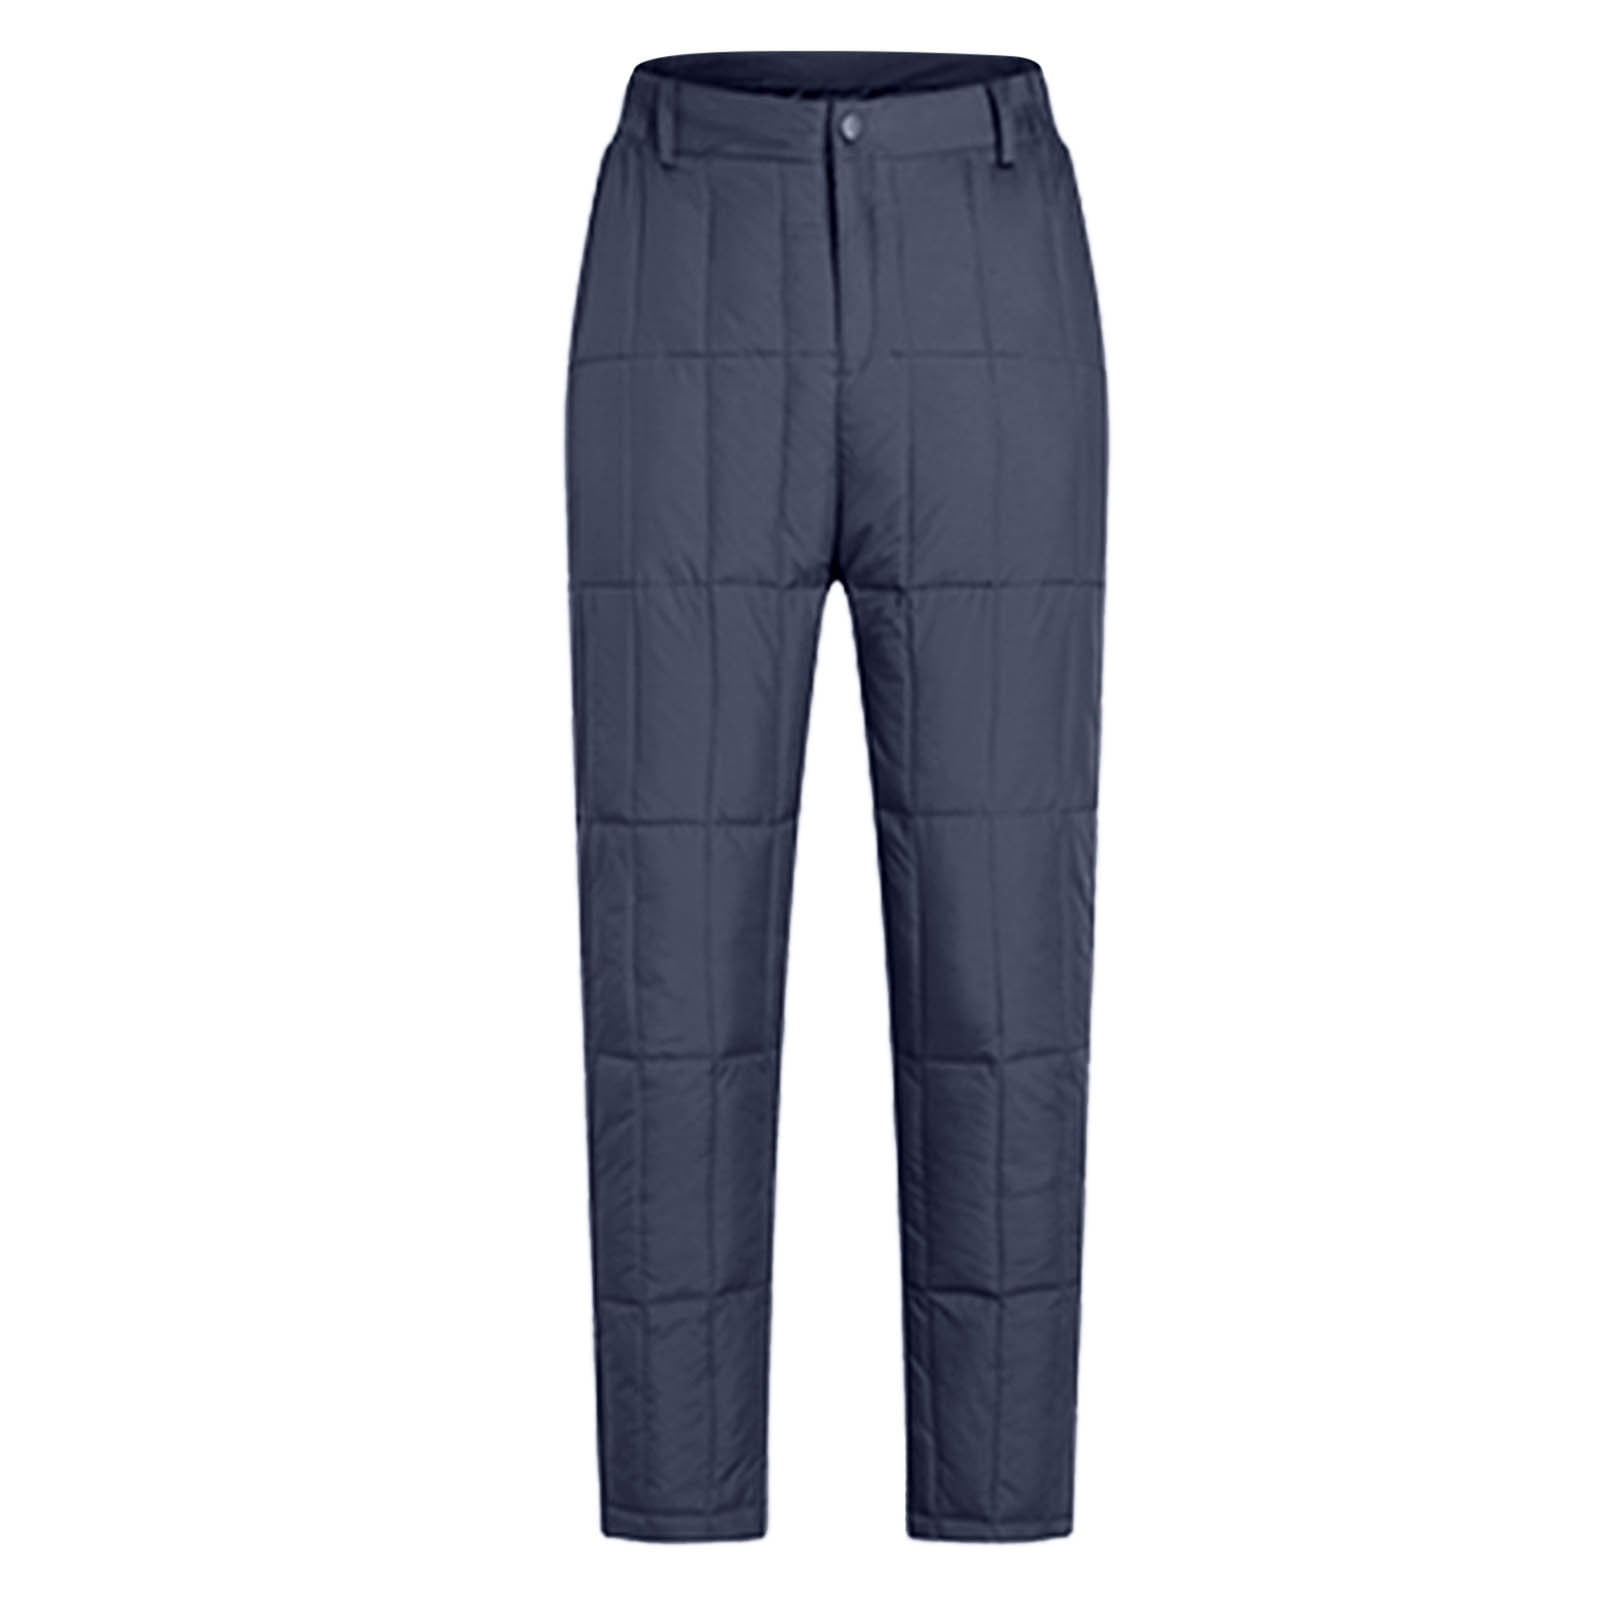 YUHAOTIN Mens Business Casual Pants Slim Men and Aomen Wear the